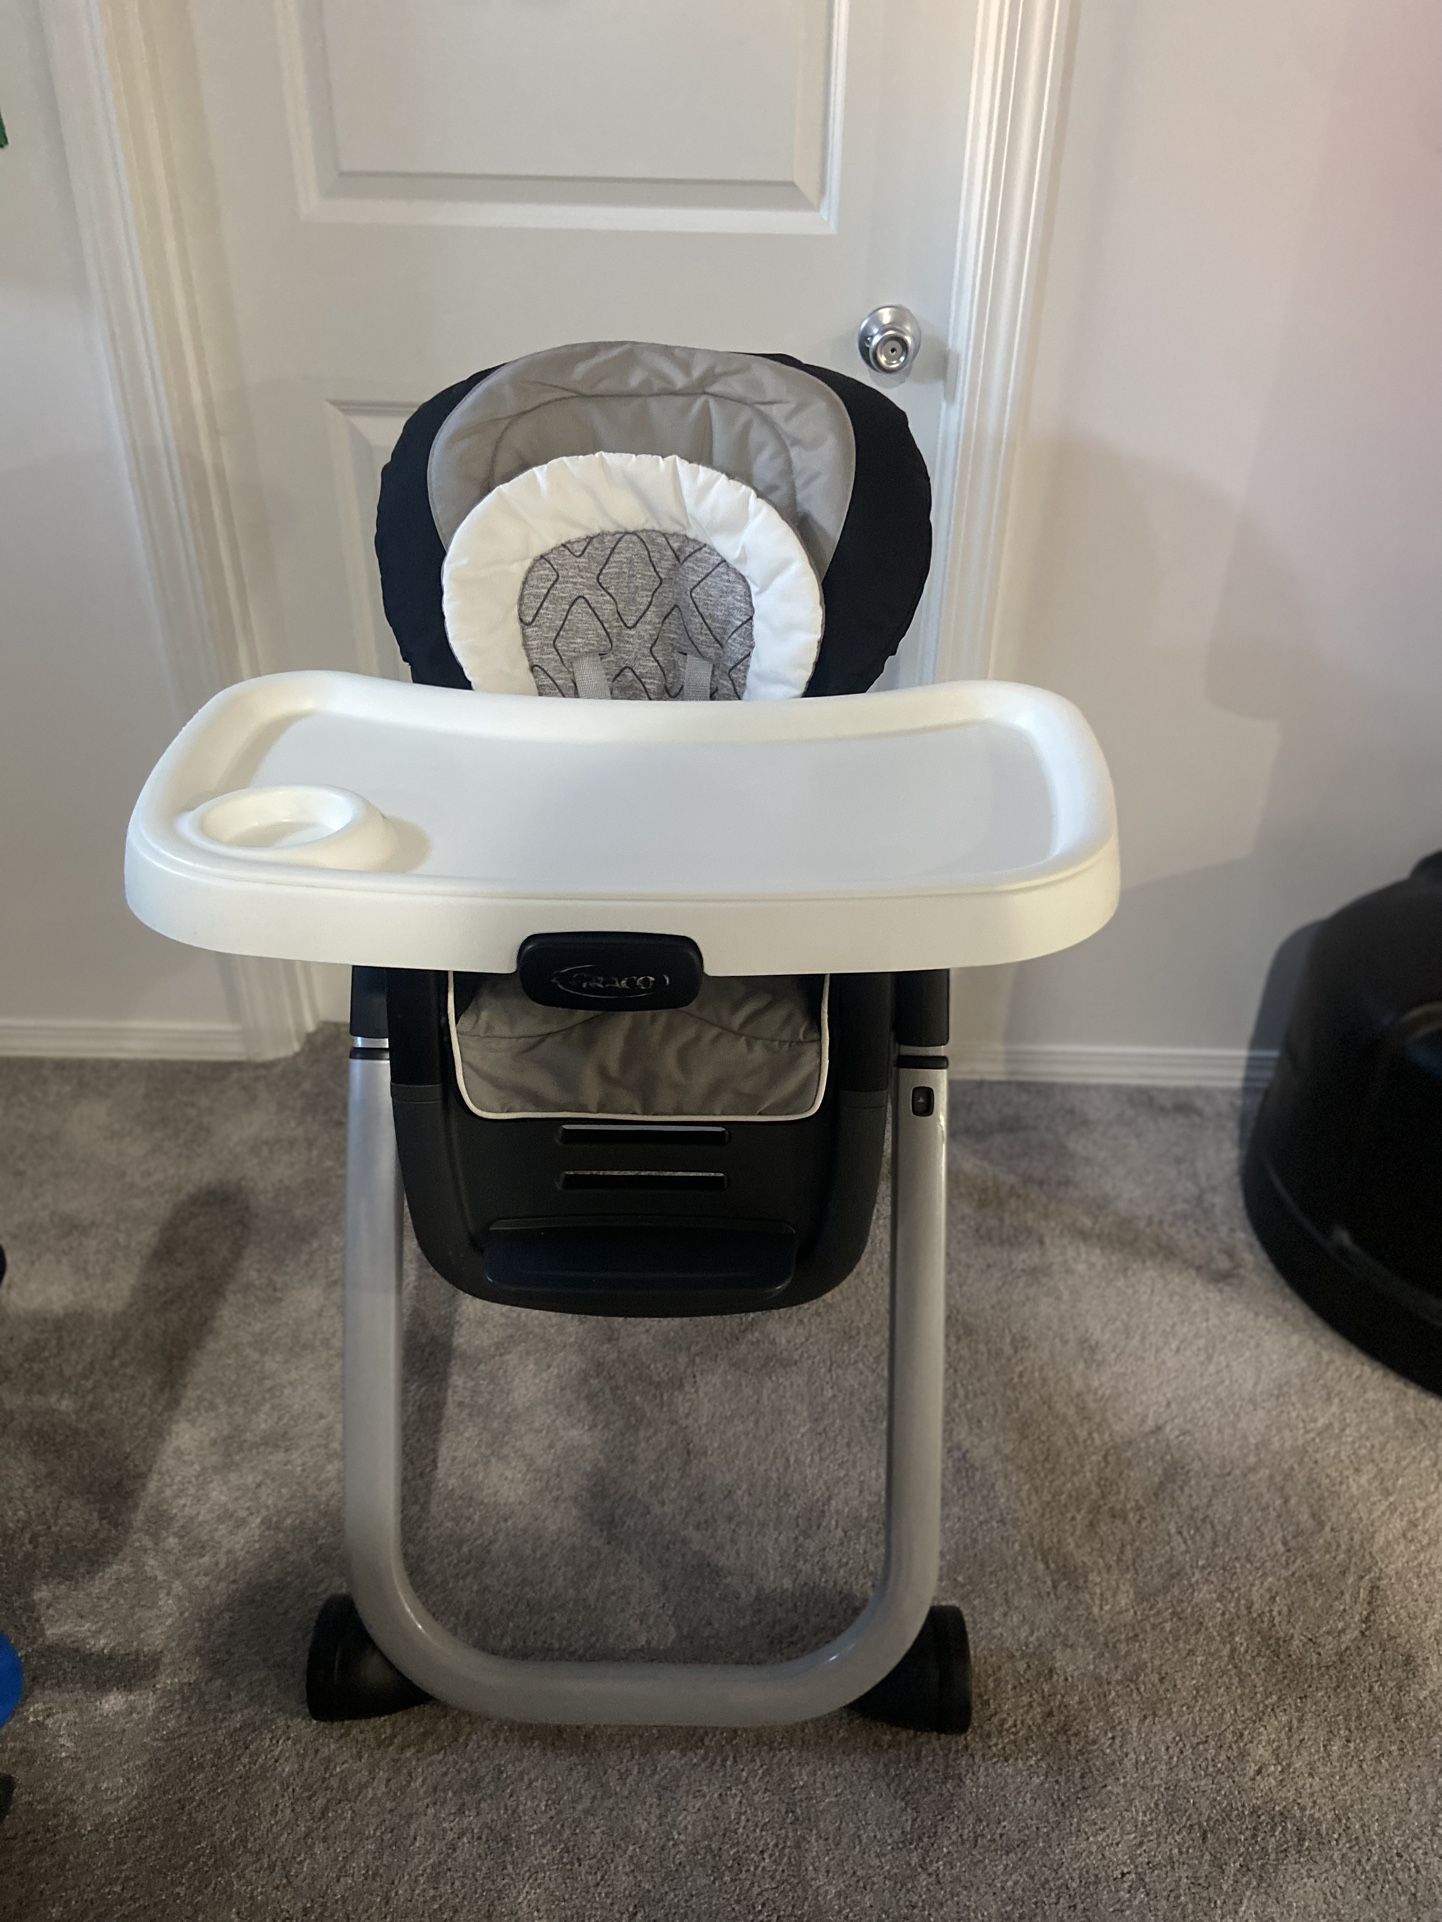 Graco DuoDiner DLX 6-in-1 High Chair